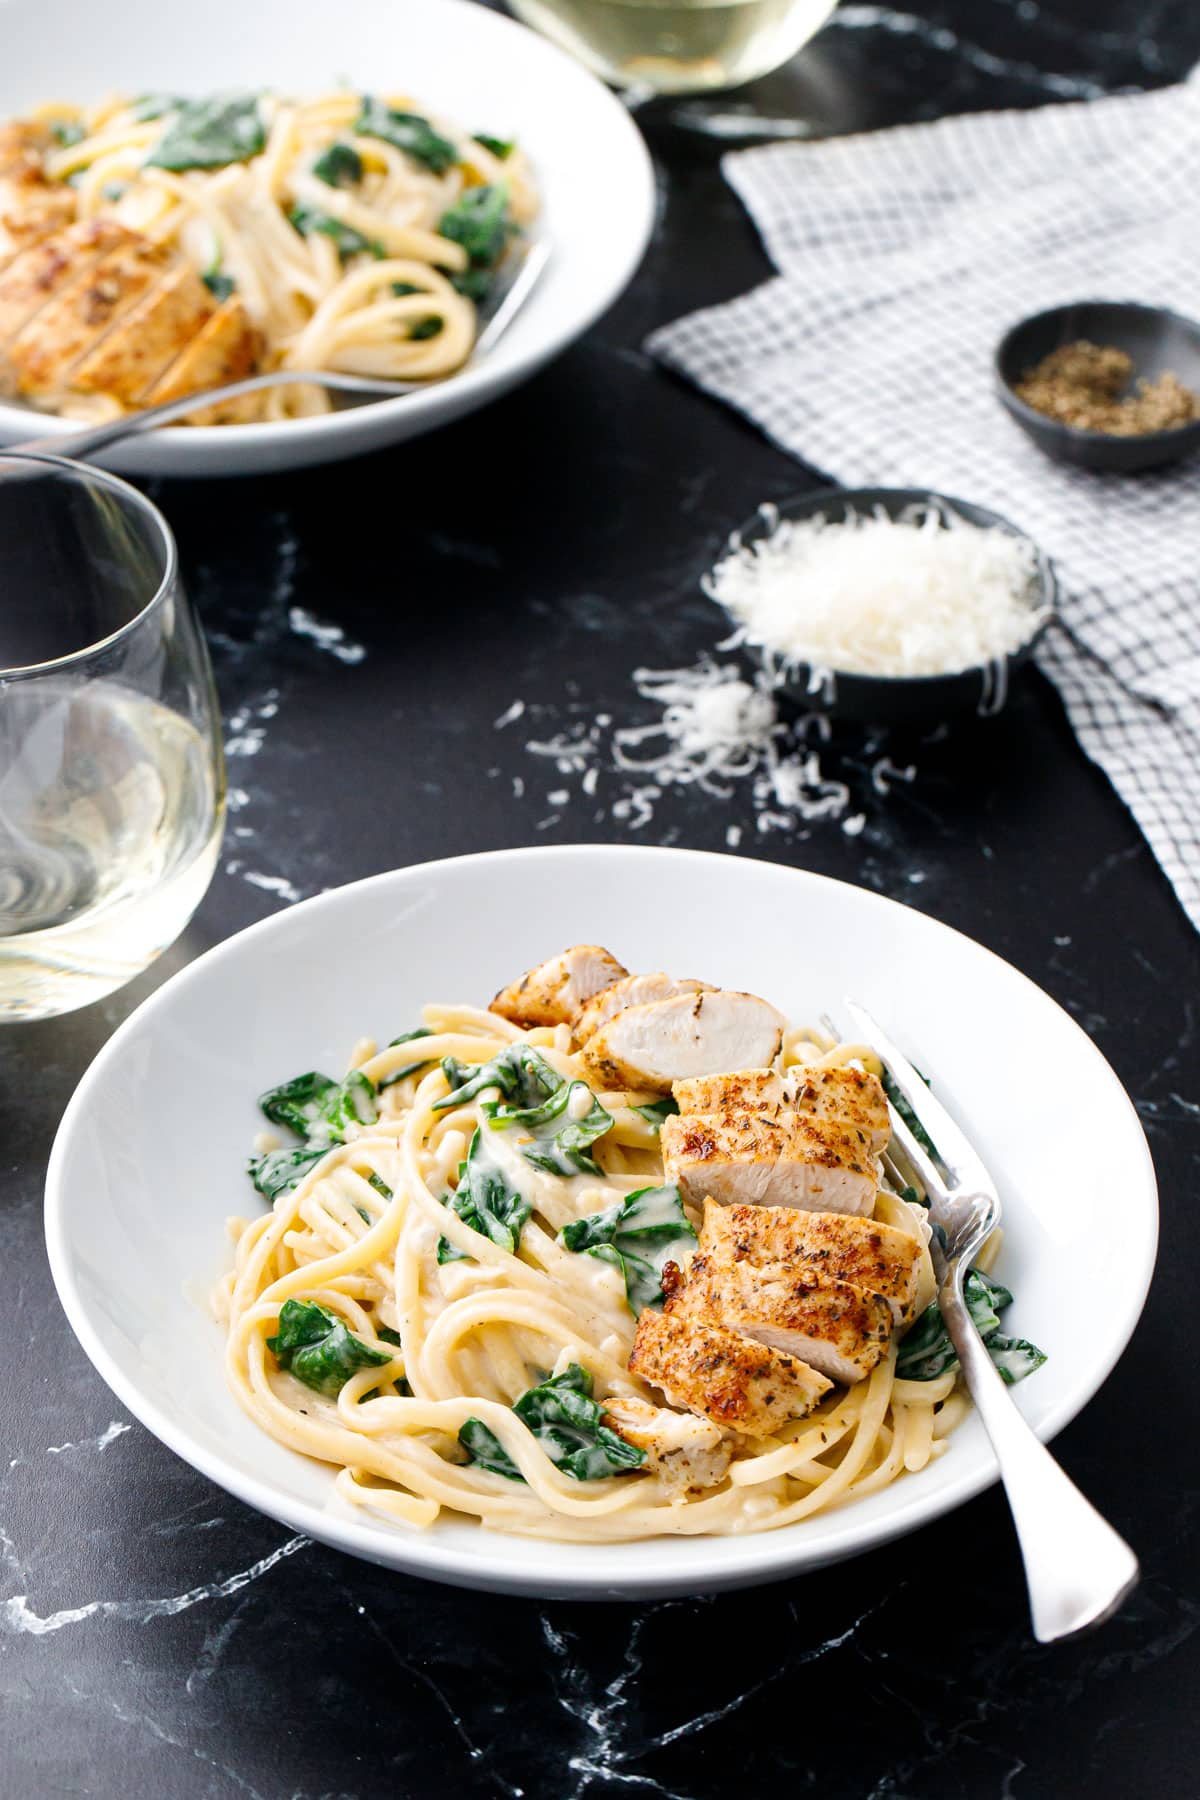 White bowls of Creamy Chicken Florentine Pasta with silver forks, dishes of parmesan cheese and black pepper, plus white wine glasses on the side.